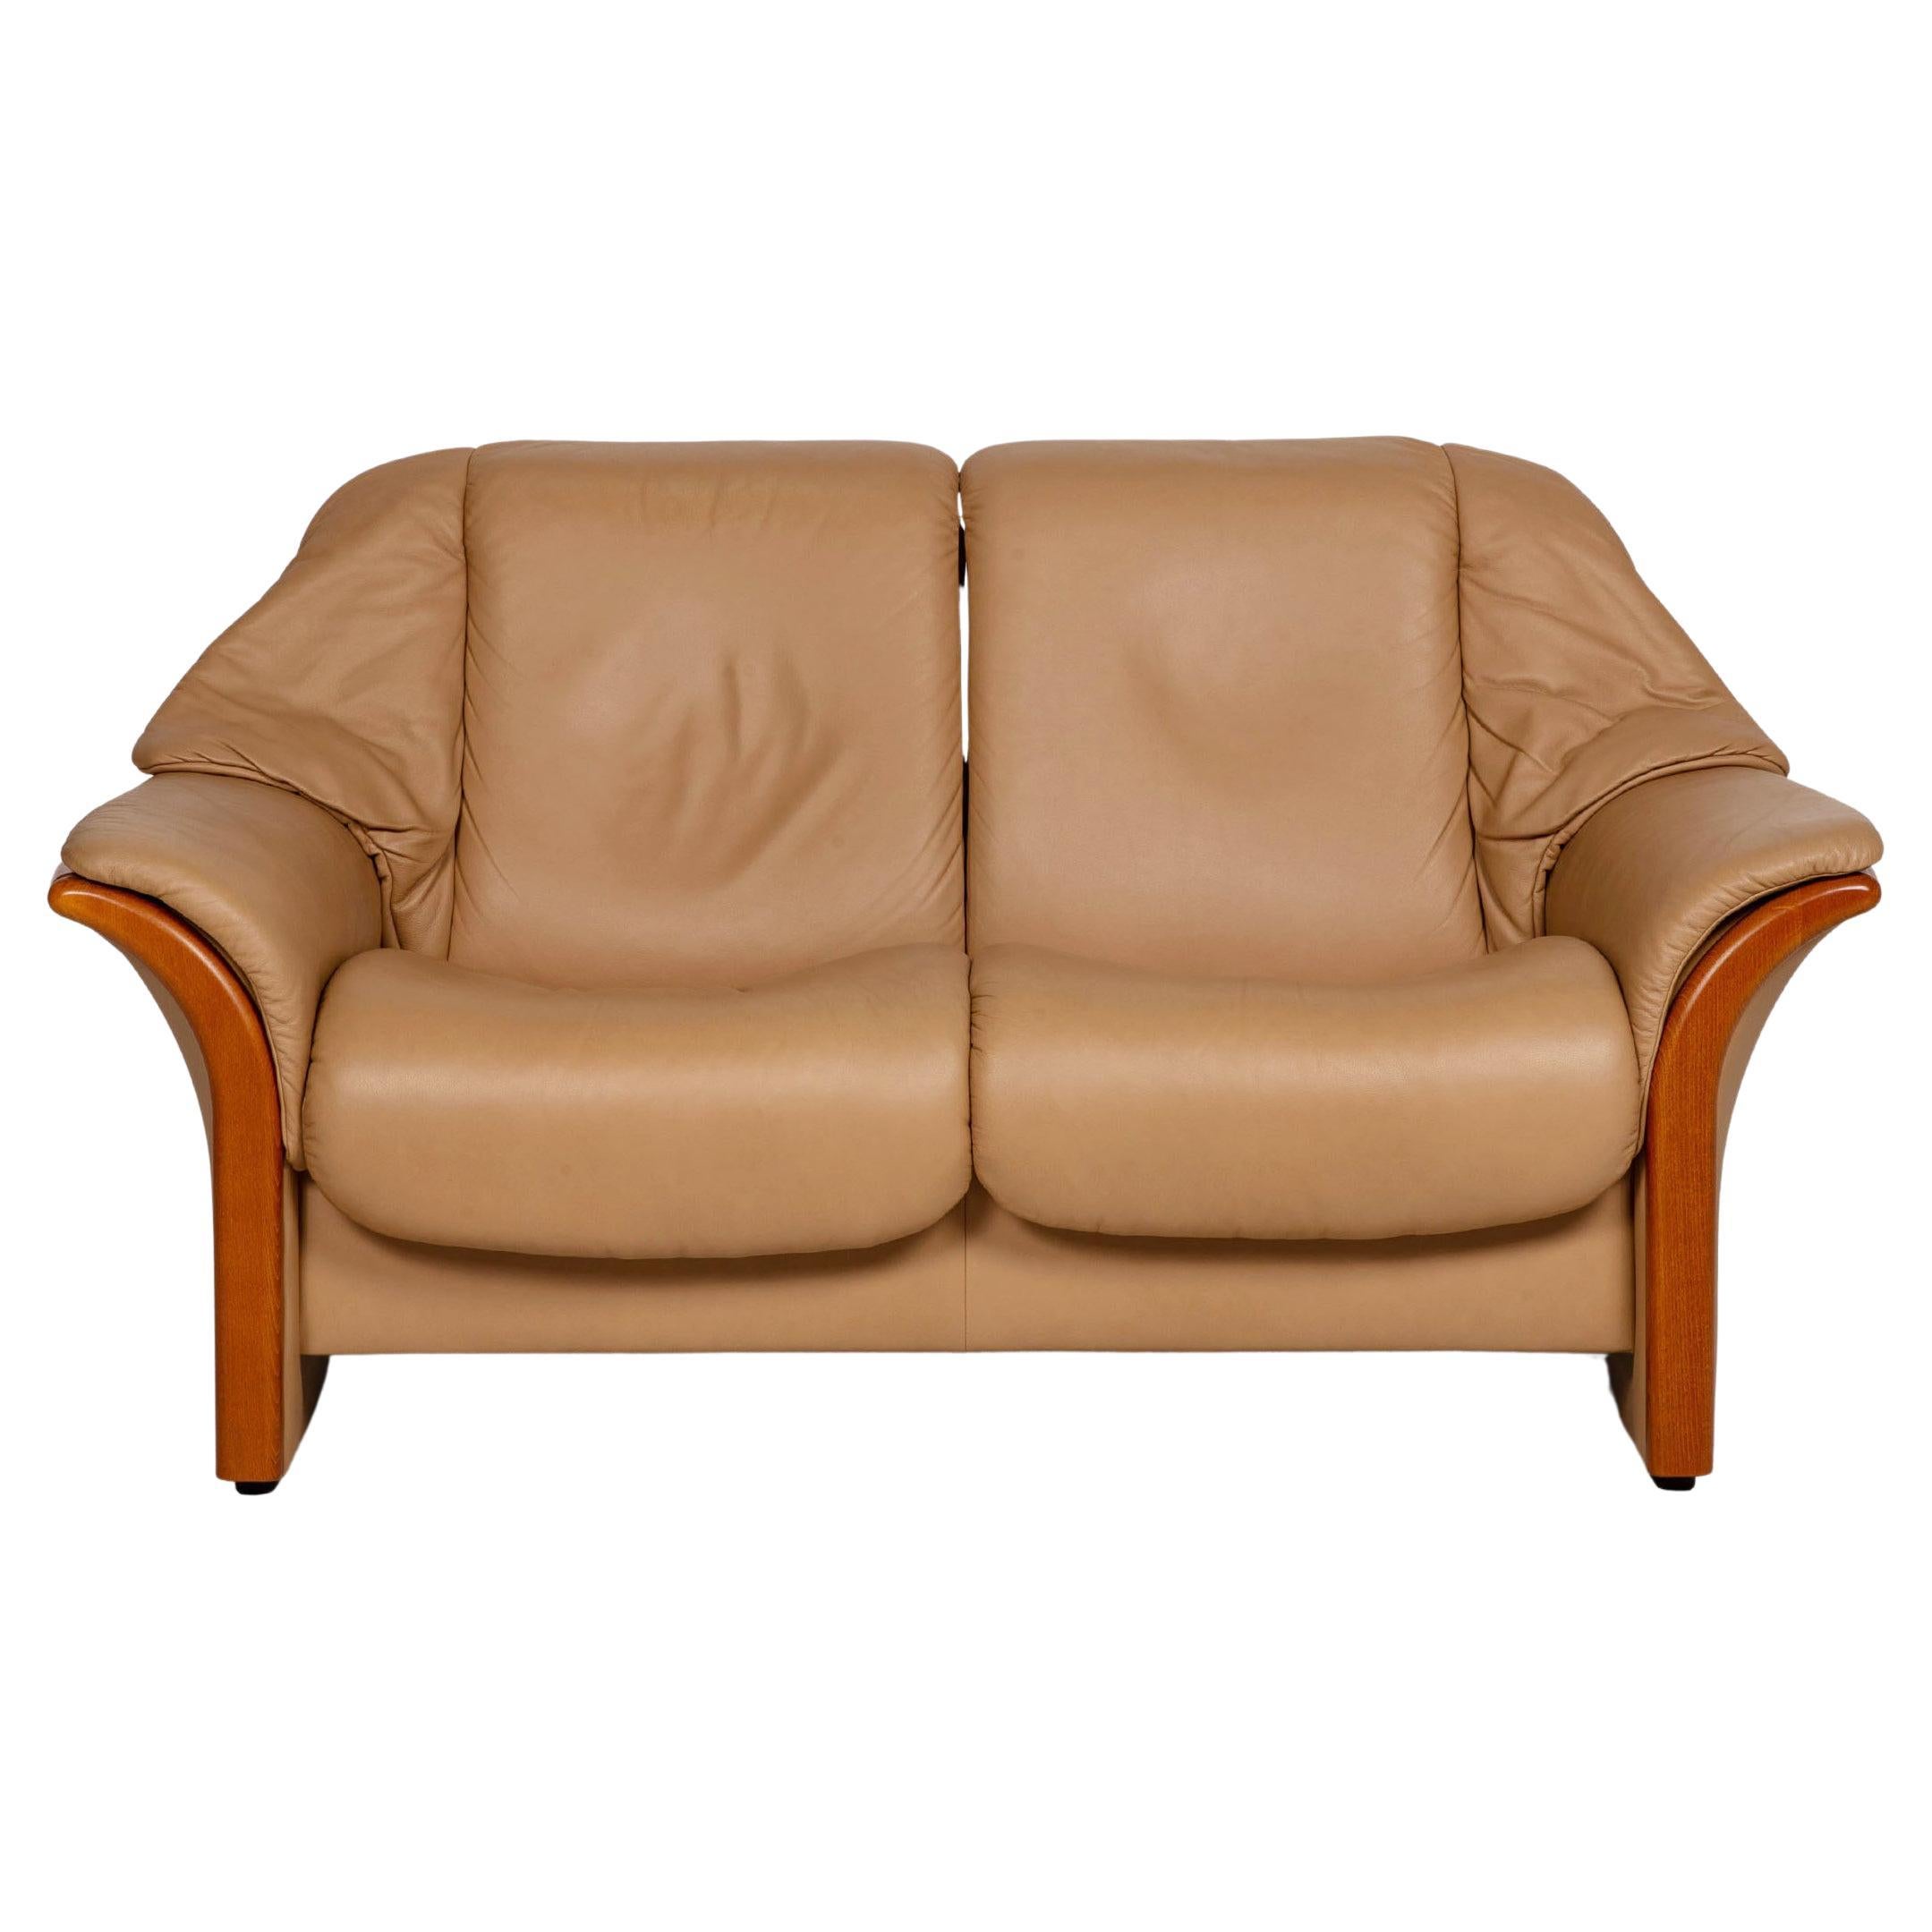 Stressless Eldorado Leather Sofa Beige Two Seater Couch For Sale